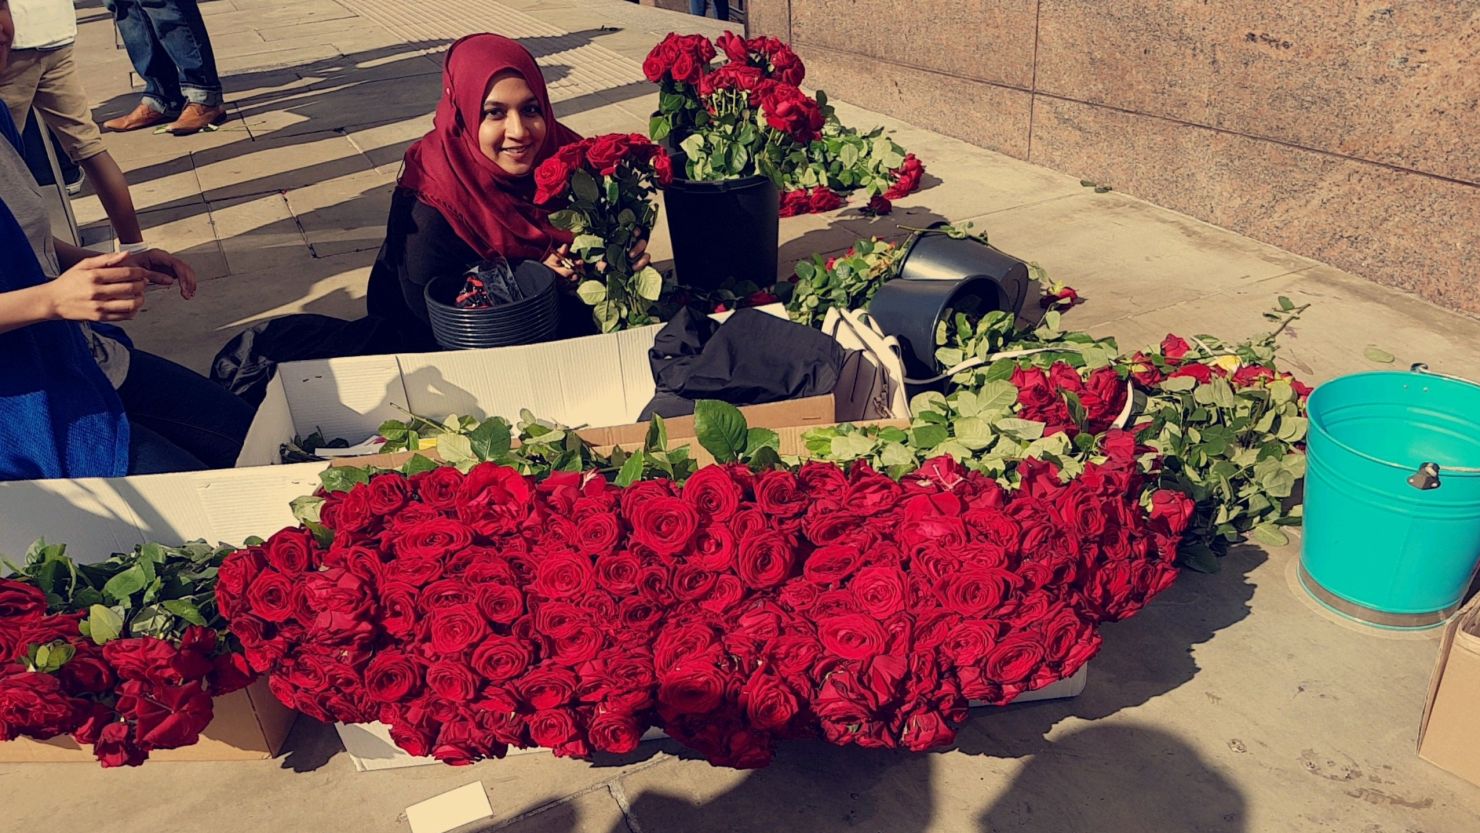 A volunteer poses by red roses given out near the London Bridge on Sunday.